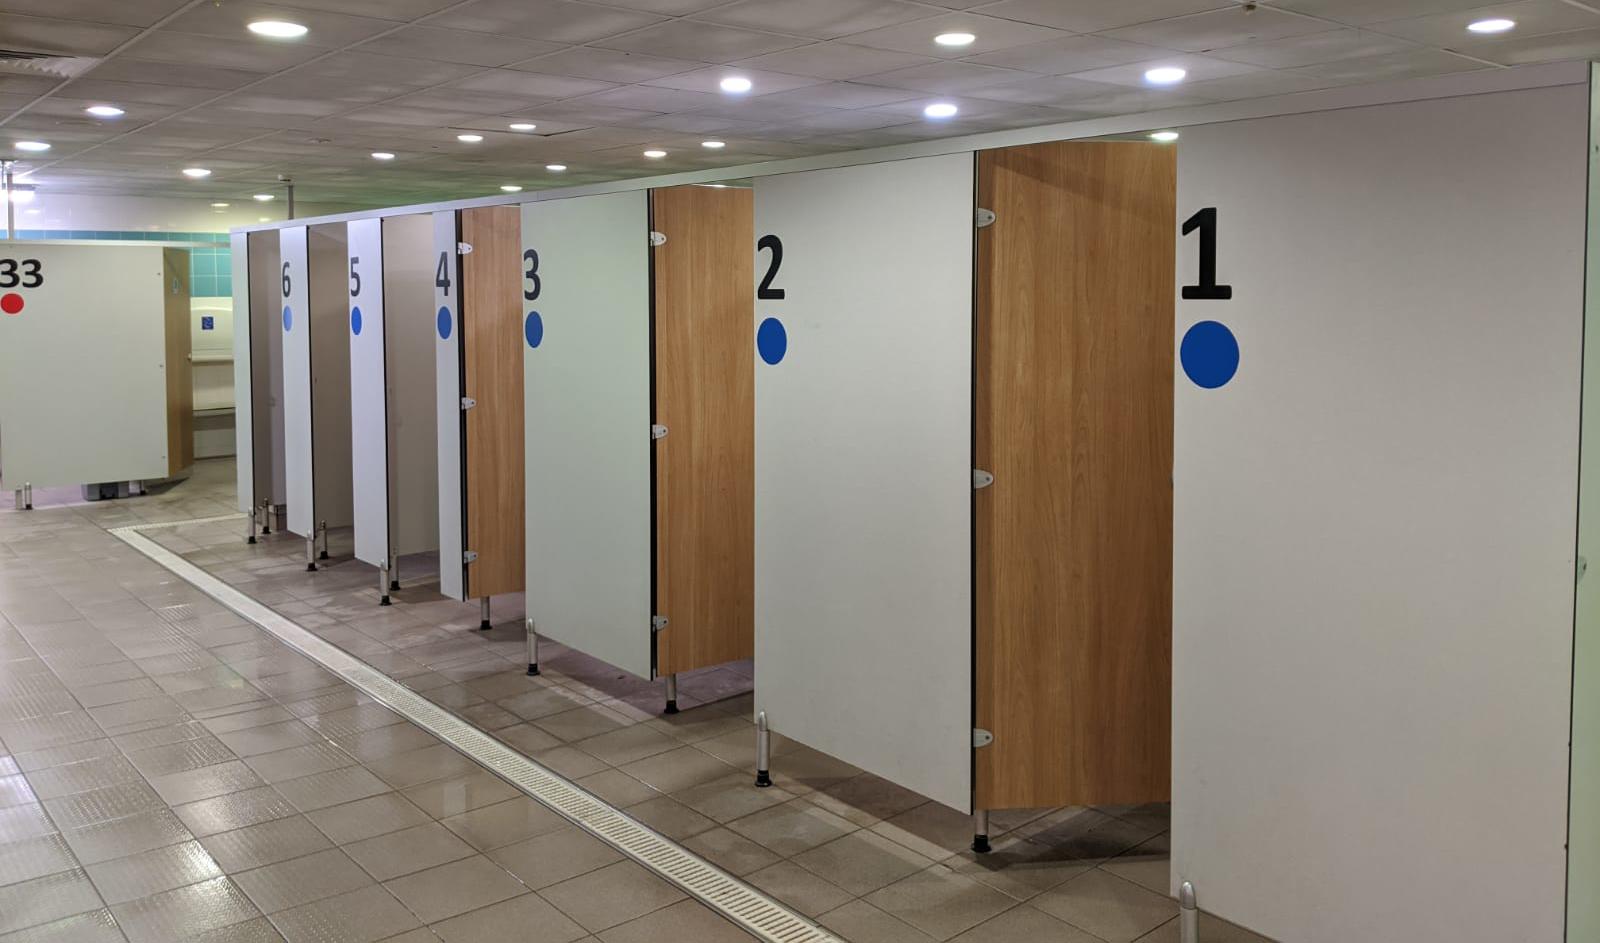 Blue cubicles for Stage 5, 6 and 7 swimmers